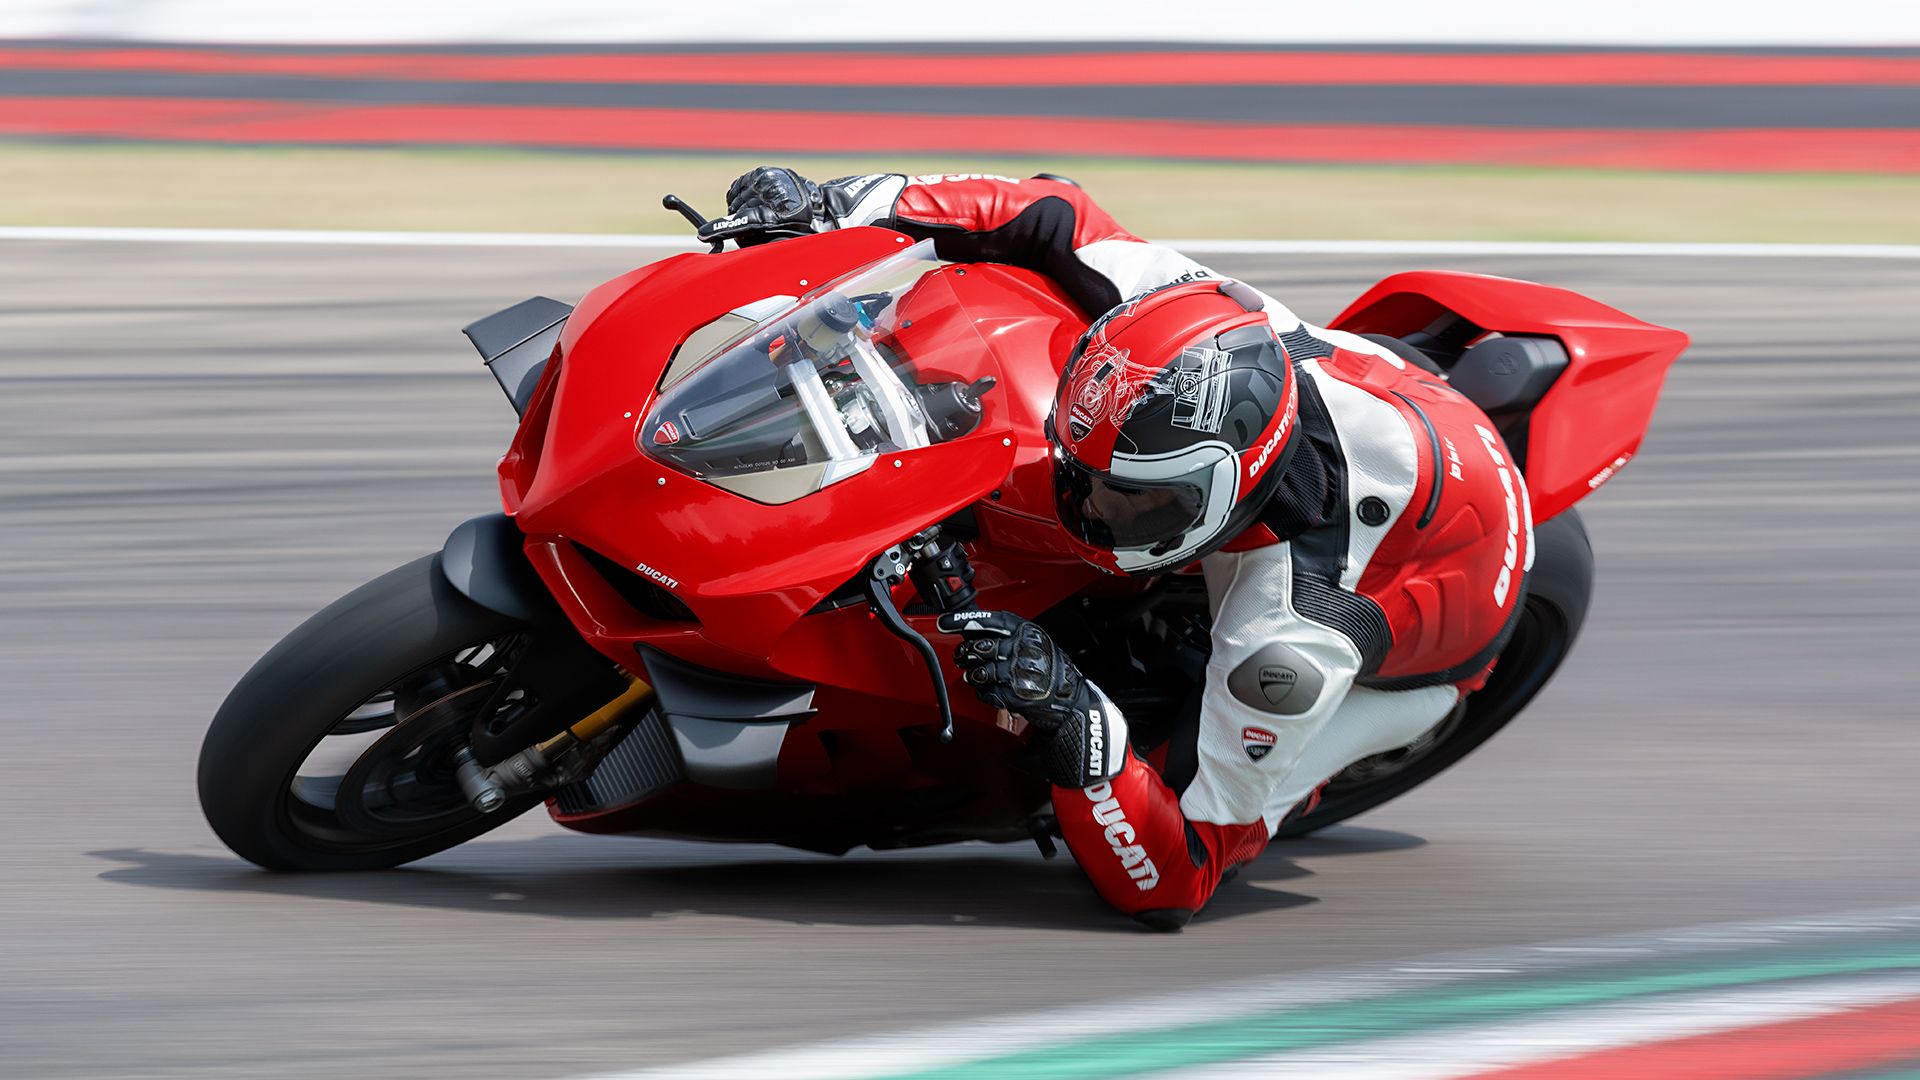 Ducati Panigale V4 2020: The Science of Speed